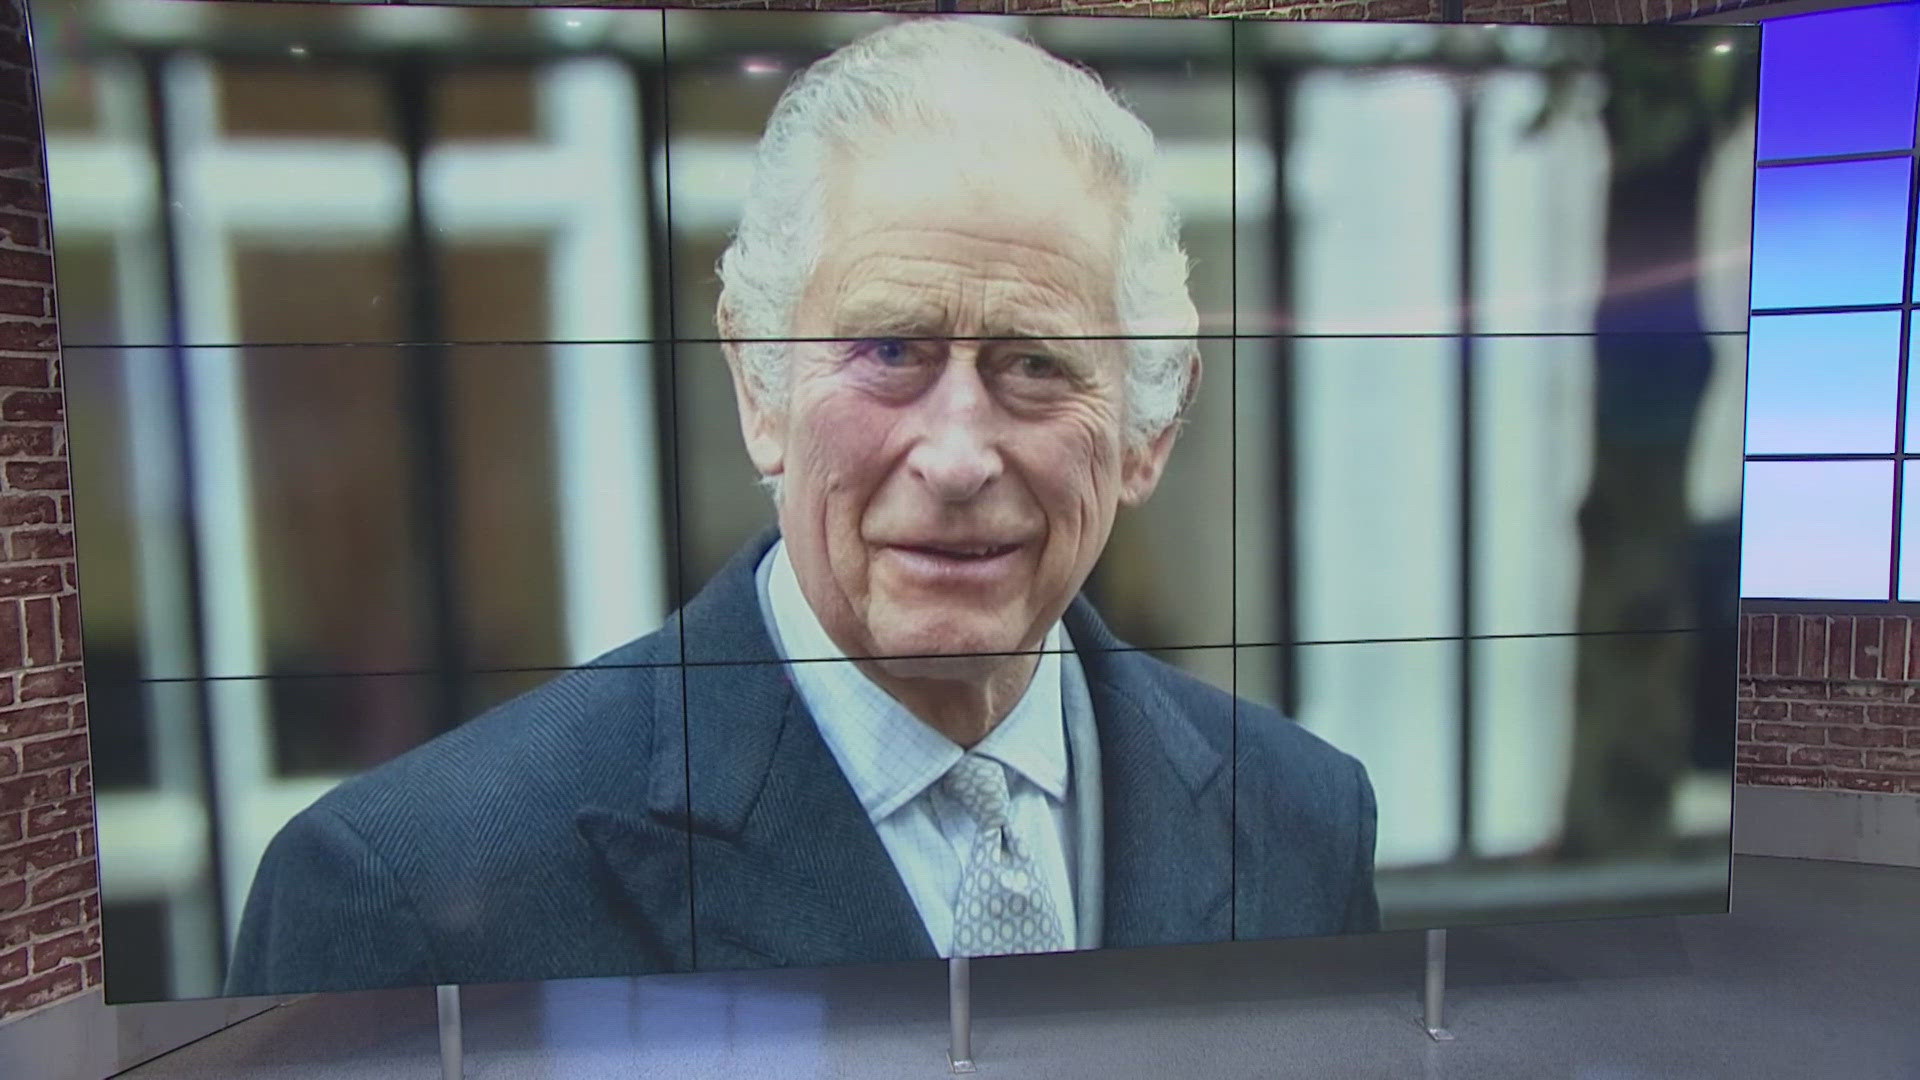 The palace says Charles will make a public visit to a cancer treatment center on Tuesday, the first of several appearances he will make in coming weeks.